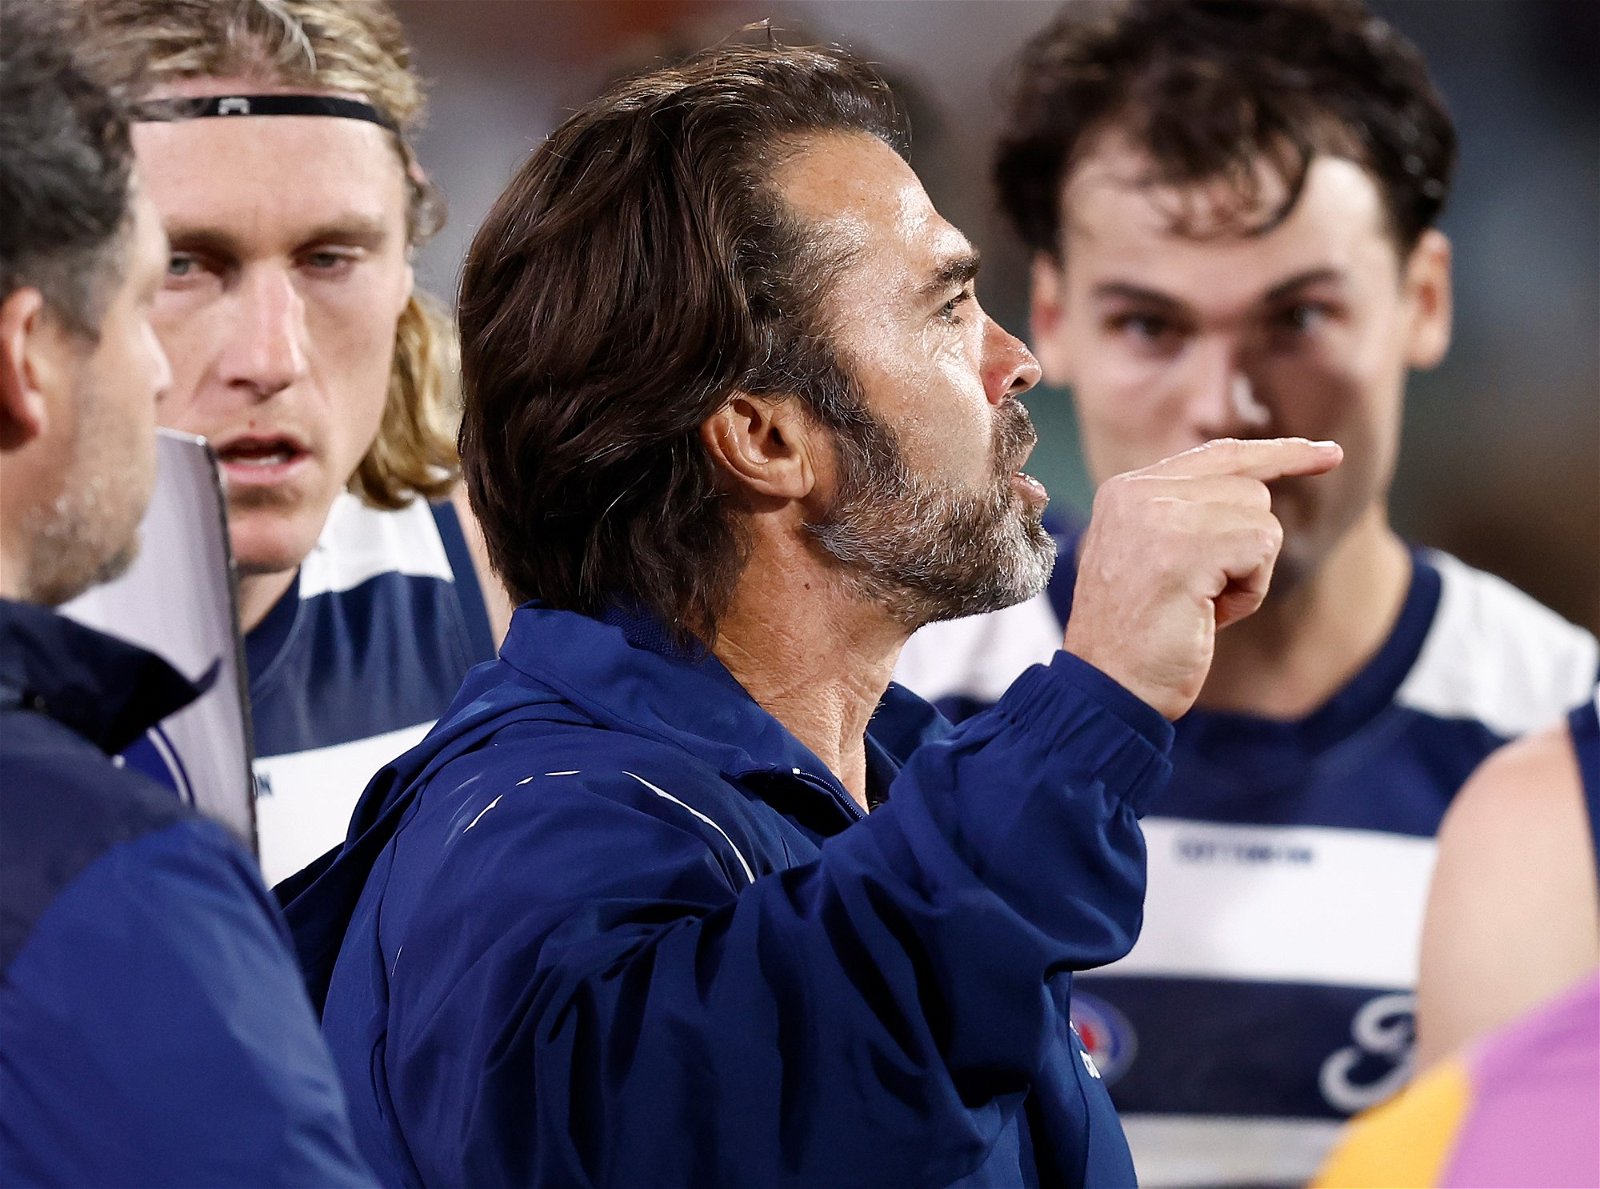 Geelong coach Chris Scott speaks to his team during the game against Western Bulldogs.